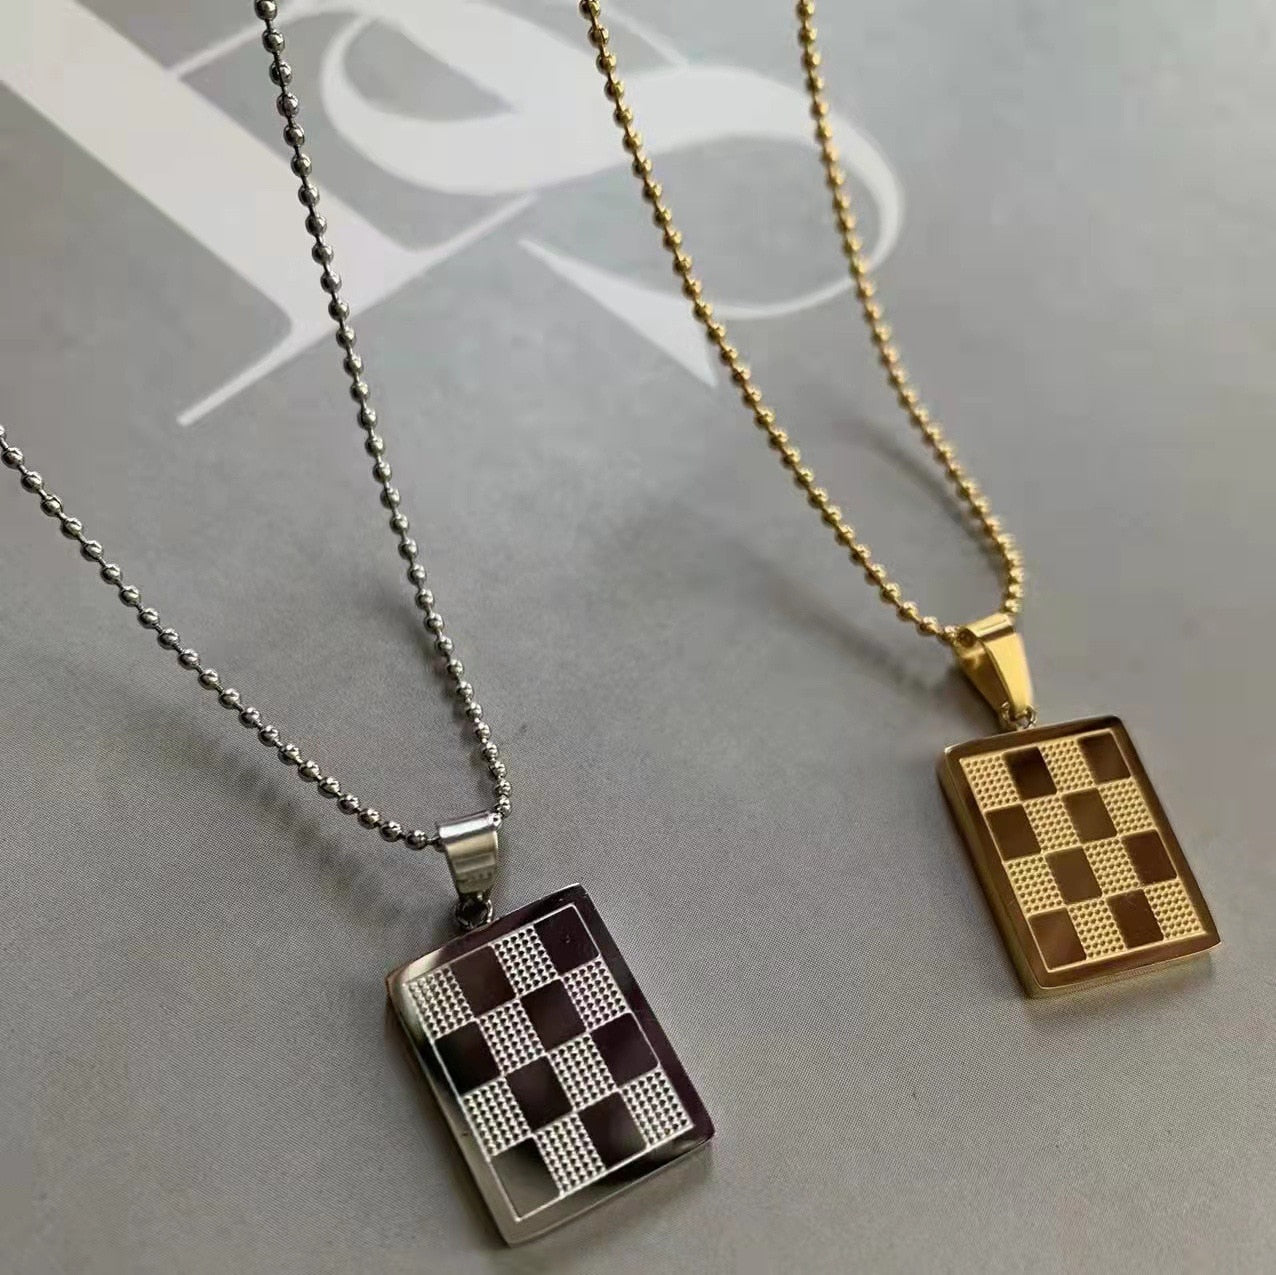 Chic Chess Pendant Necklace